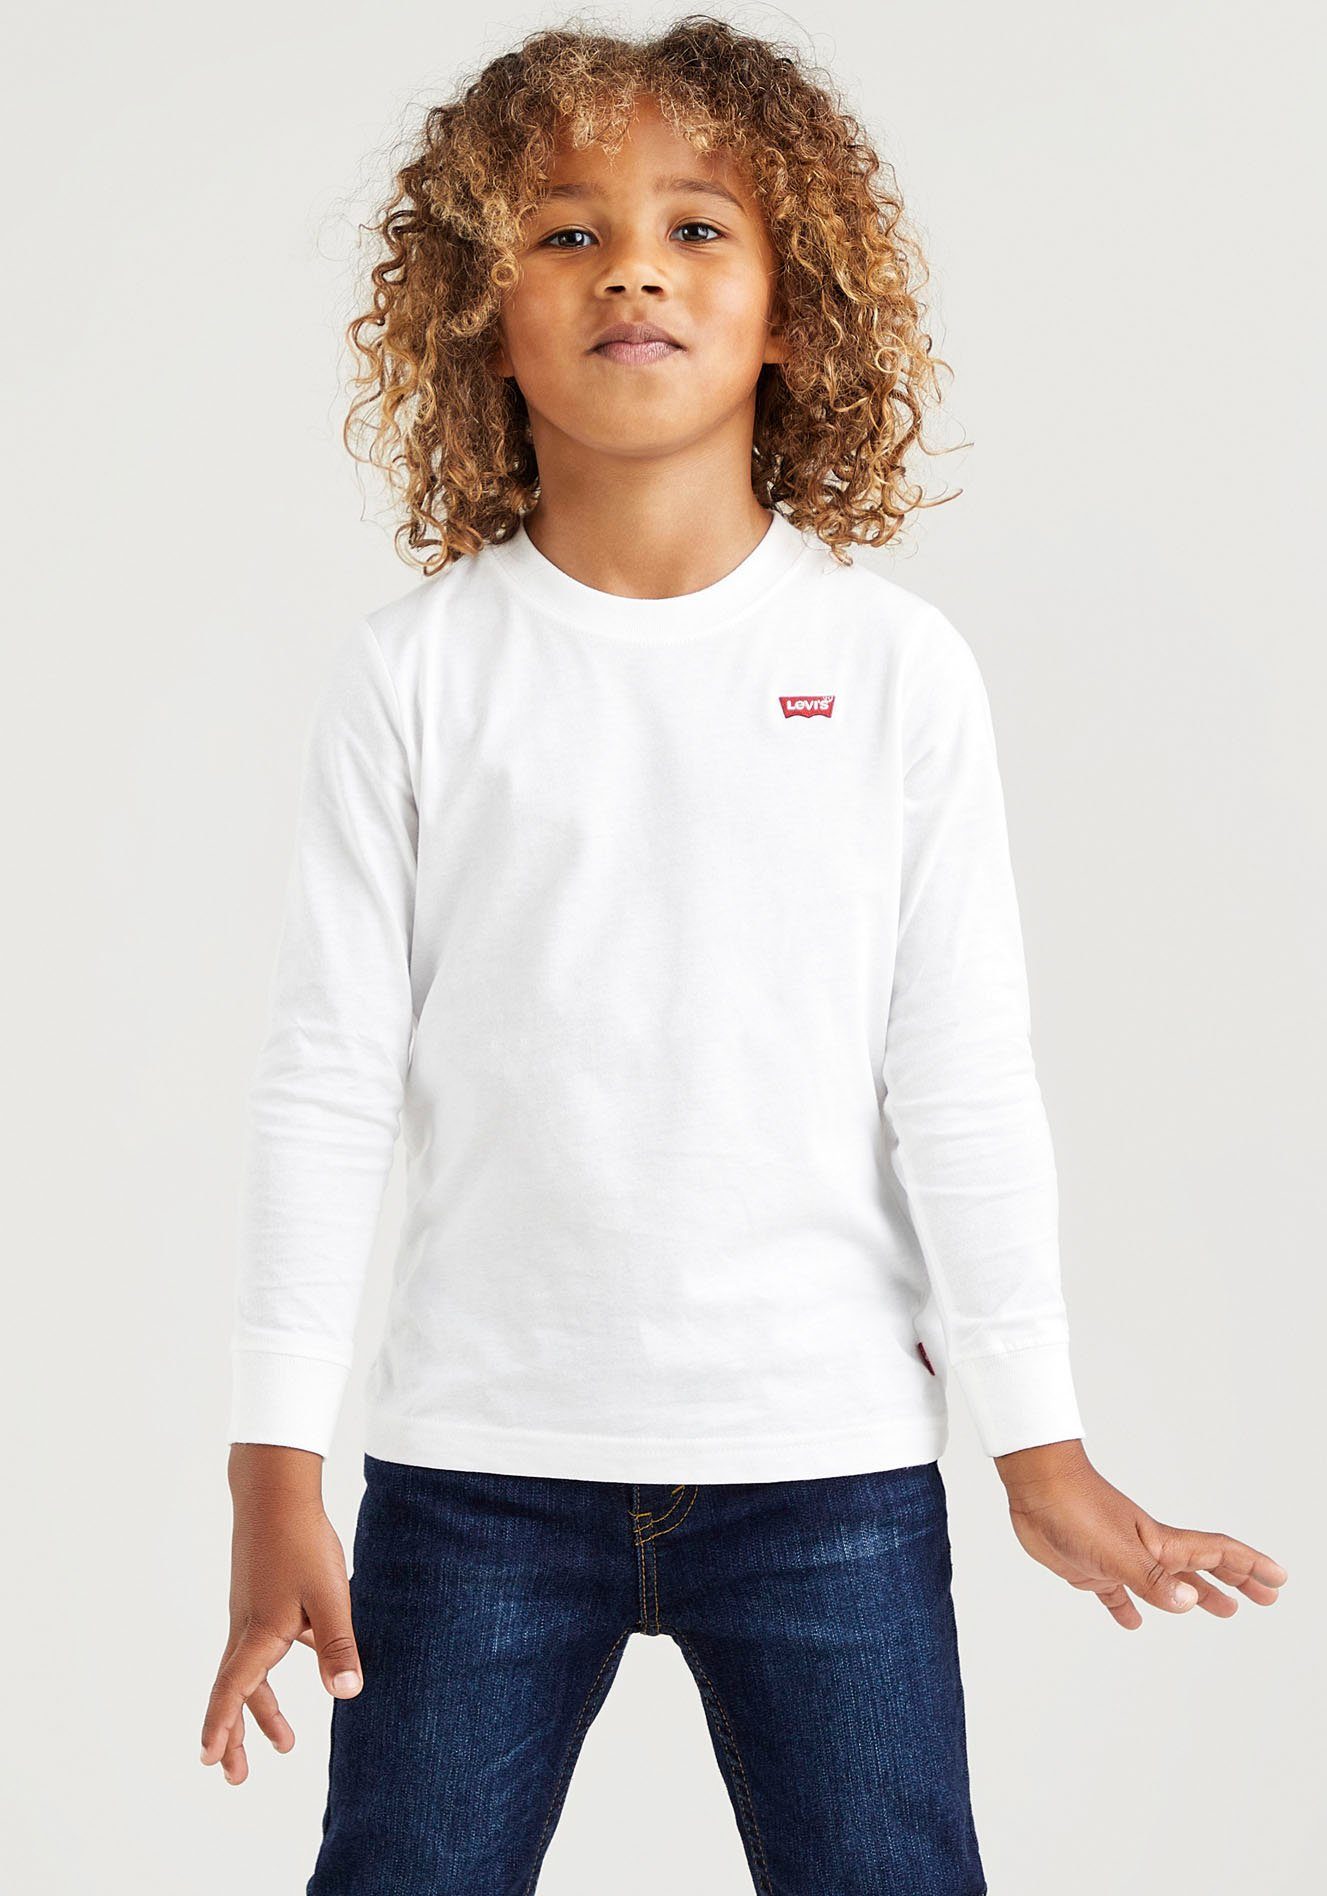 L/S for CHESTHIT Levi's® BATWING weiß Langarmshirt Kids BOYS TEE